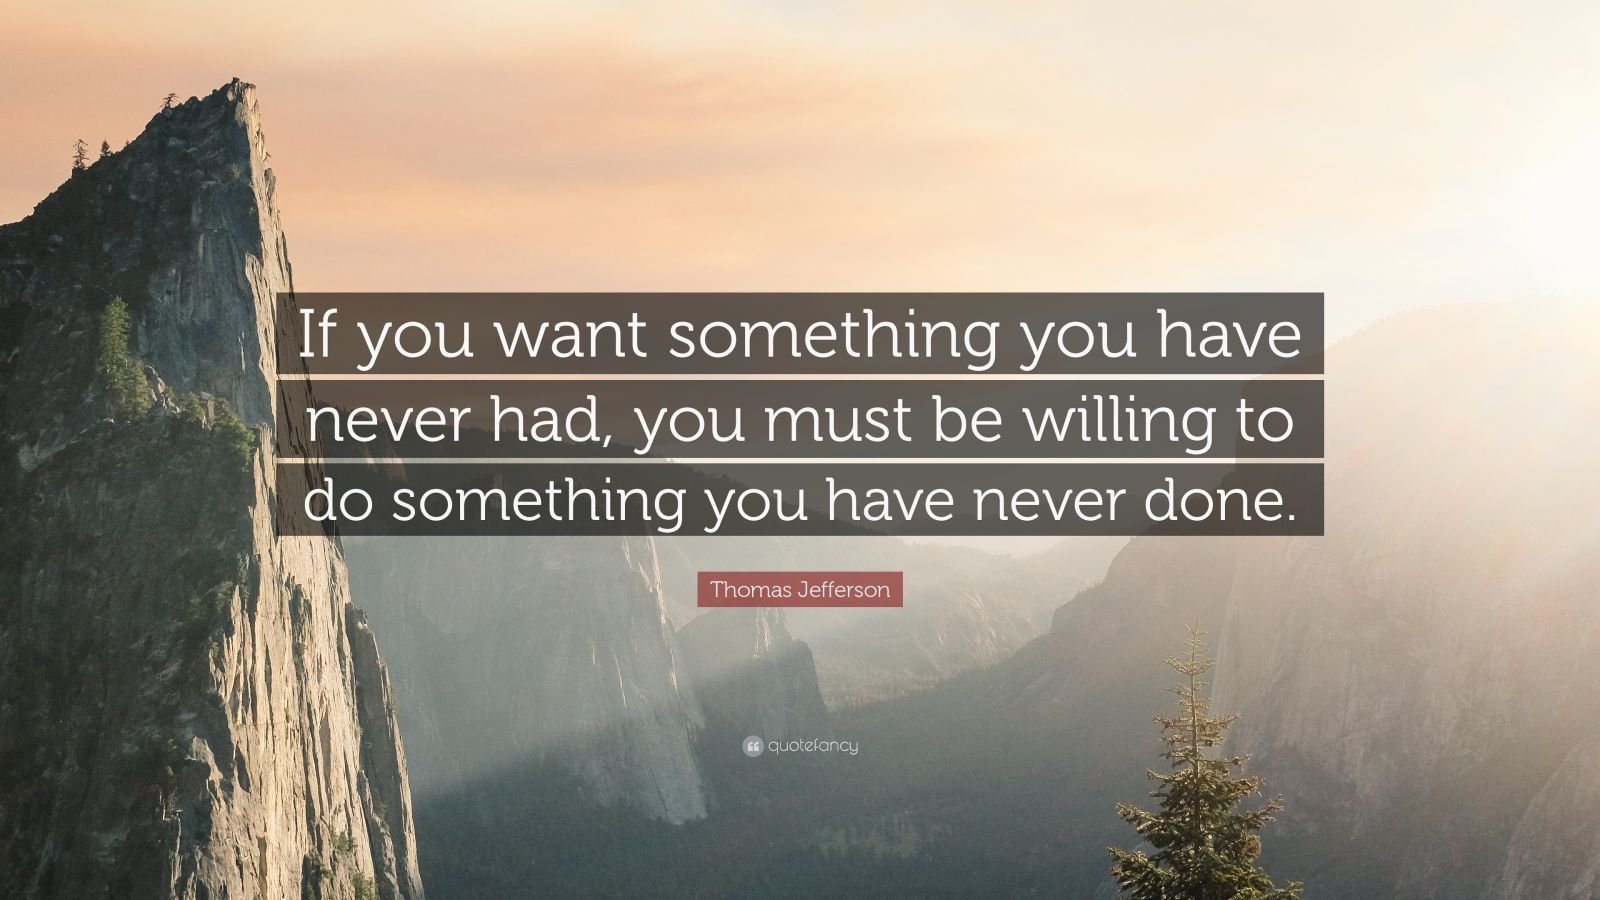 Motivational Quotes “If you want something you have never had you must be